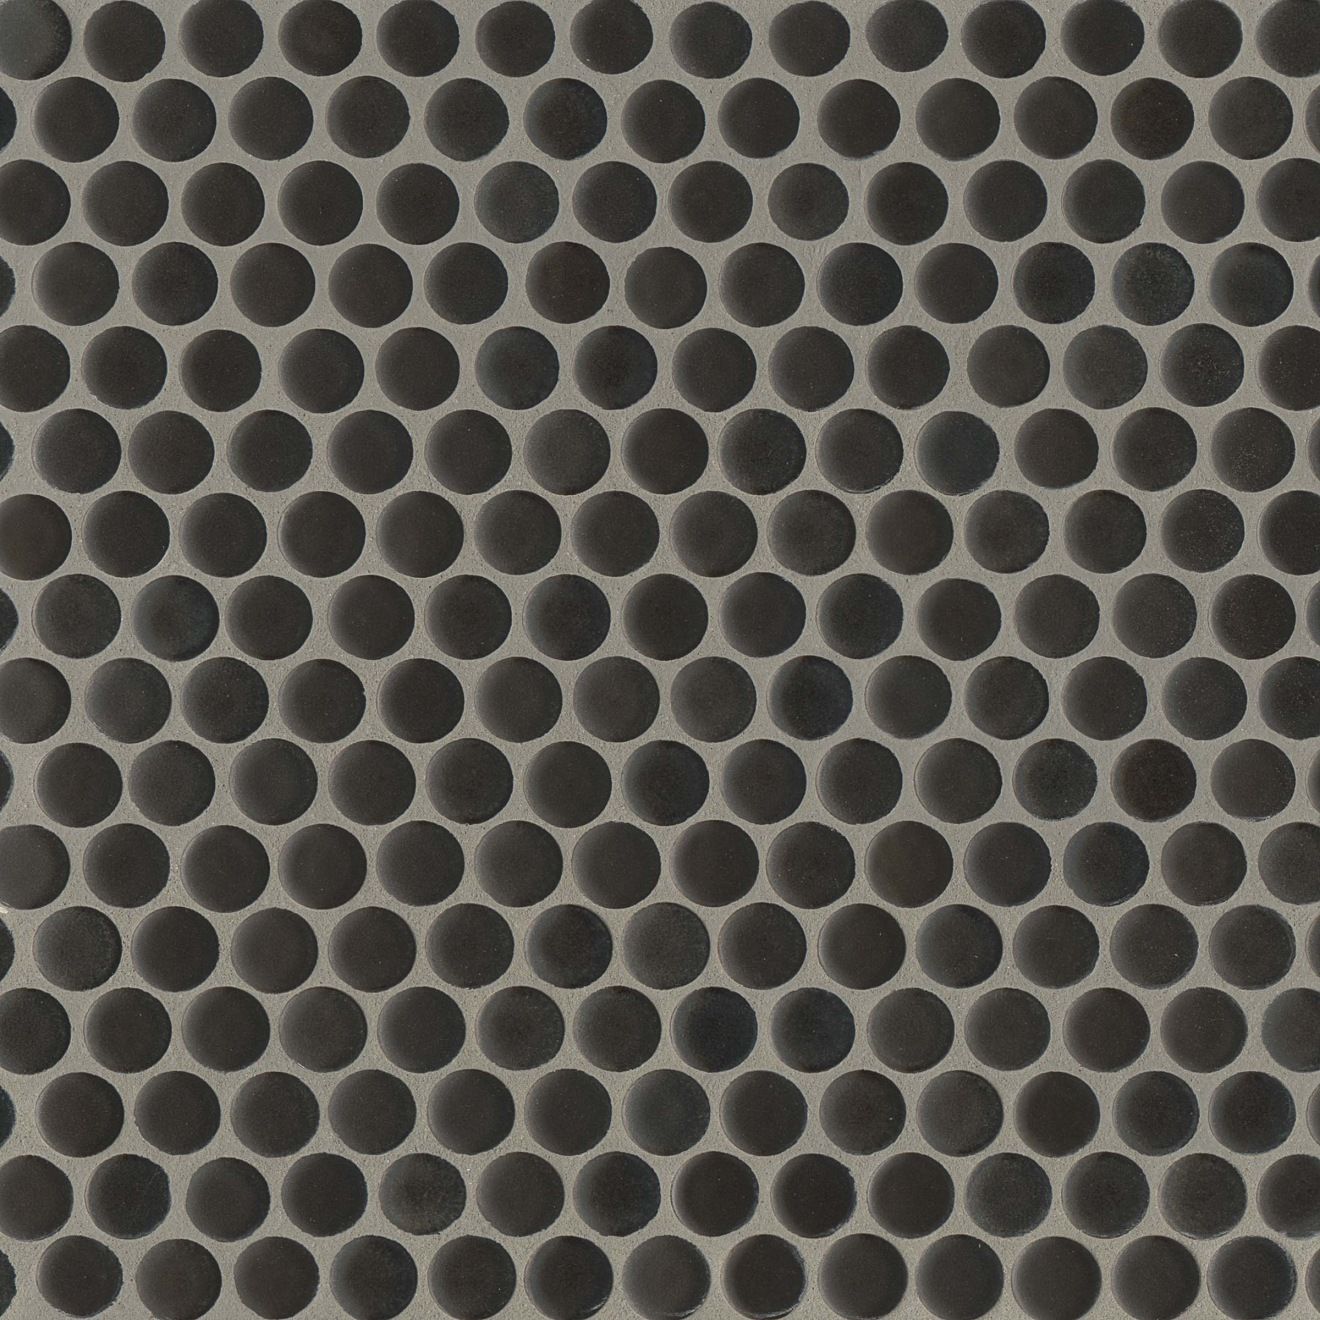 360 3/4" x 3/4" Penny Round Matte Mosaic Tile in Charcoal | Bedrosians Tile & Stone